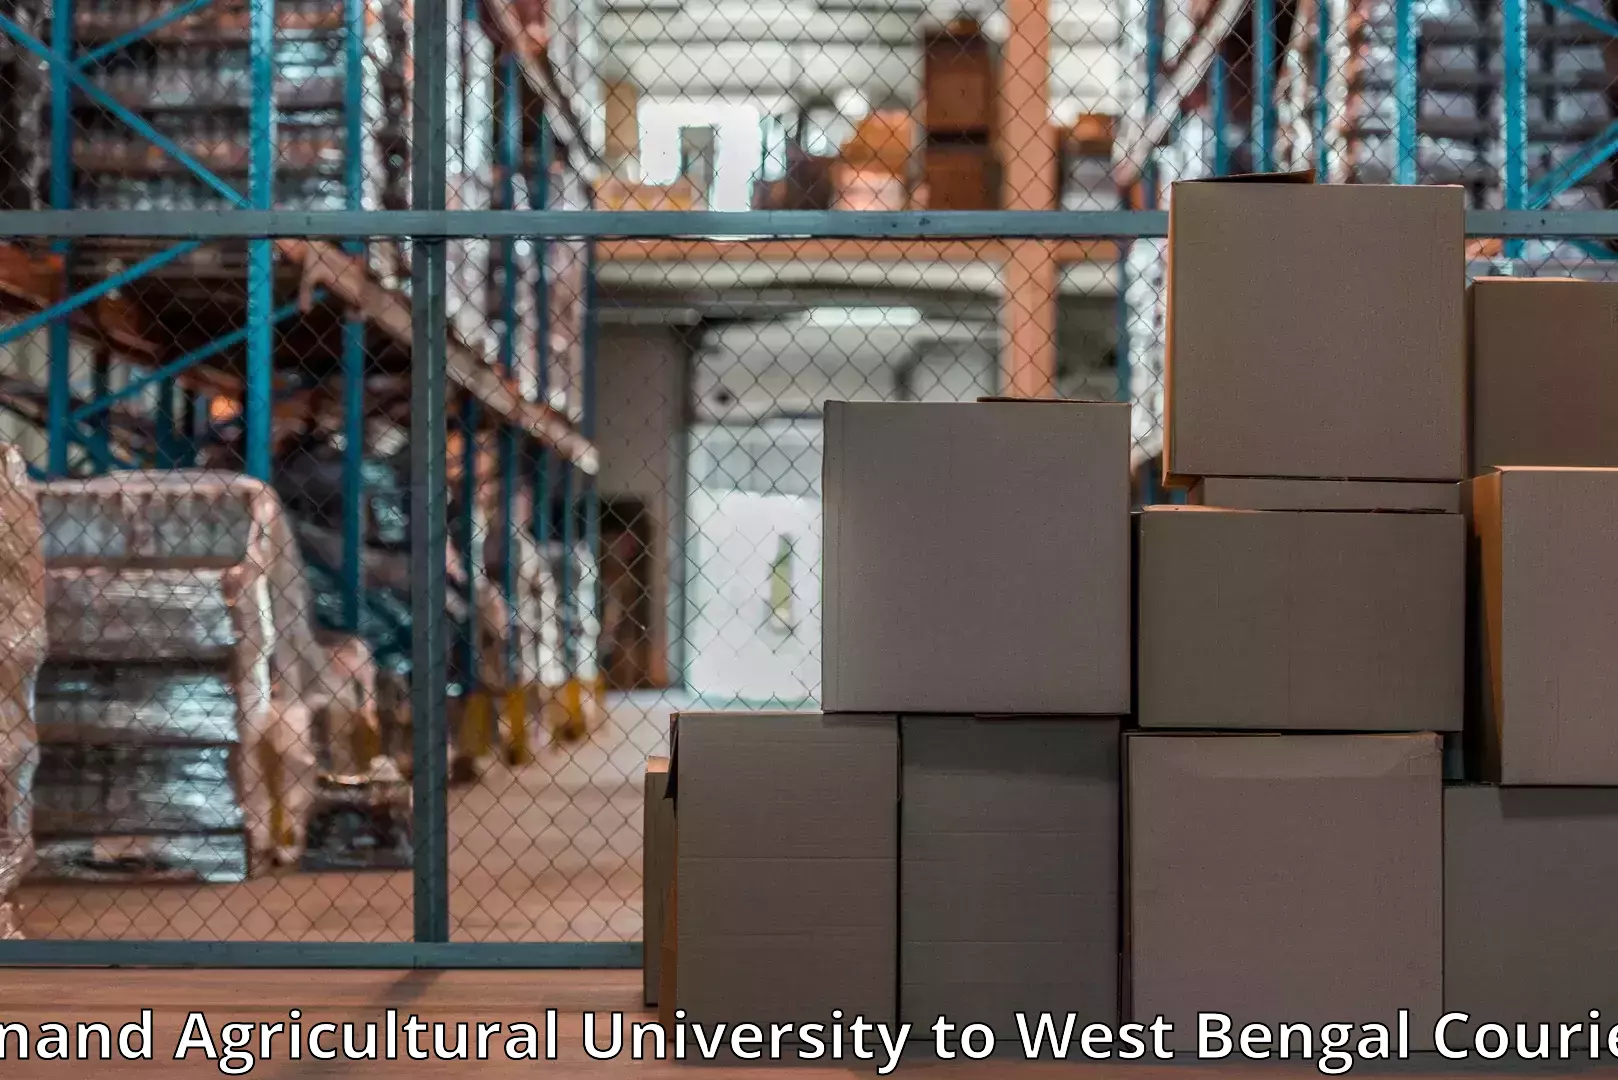 Furniture moving experts Anand Agricultural University to Joypul